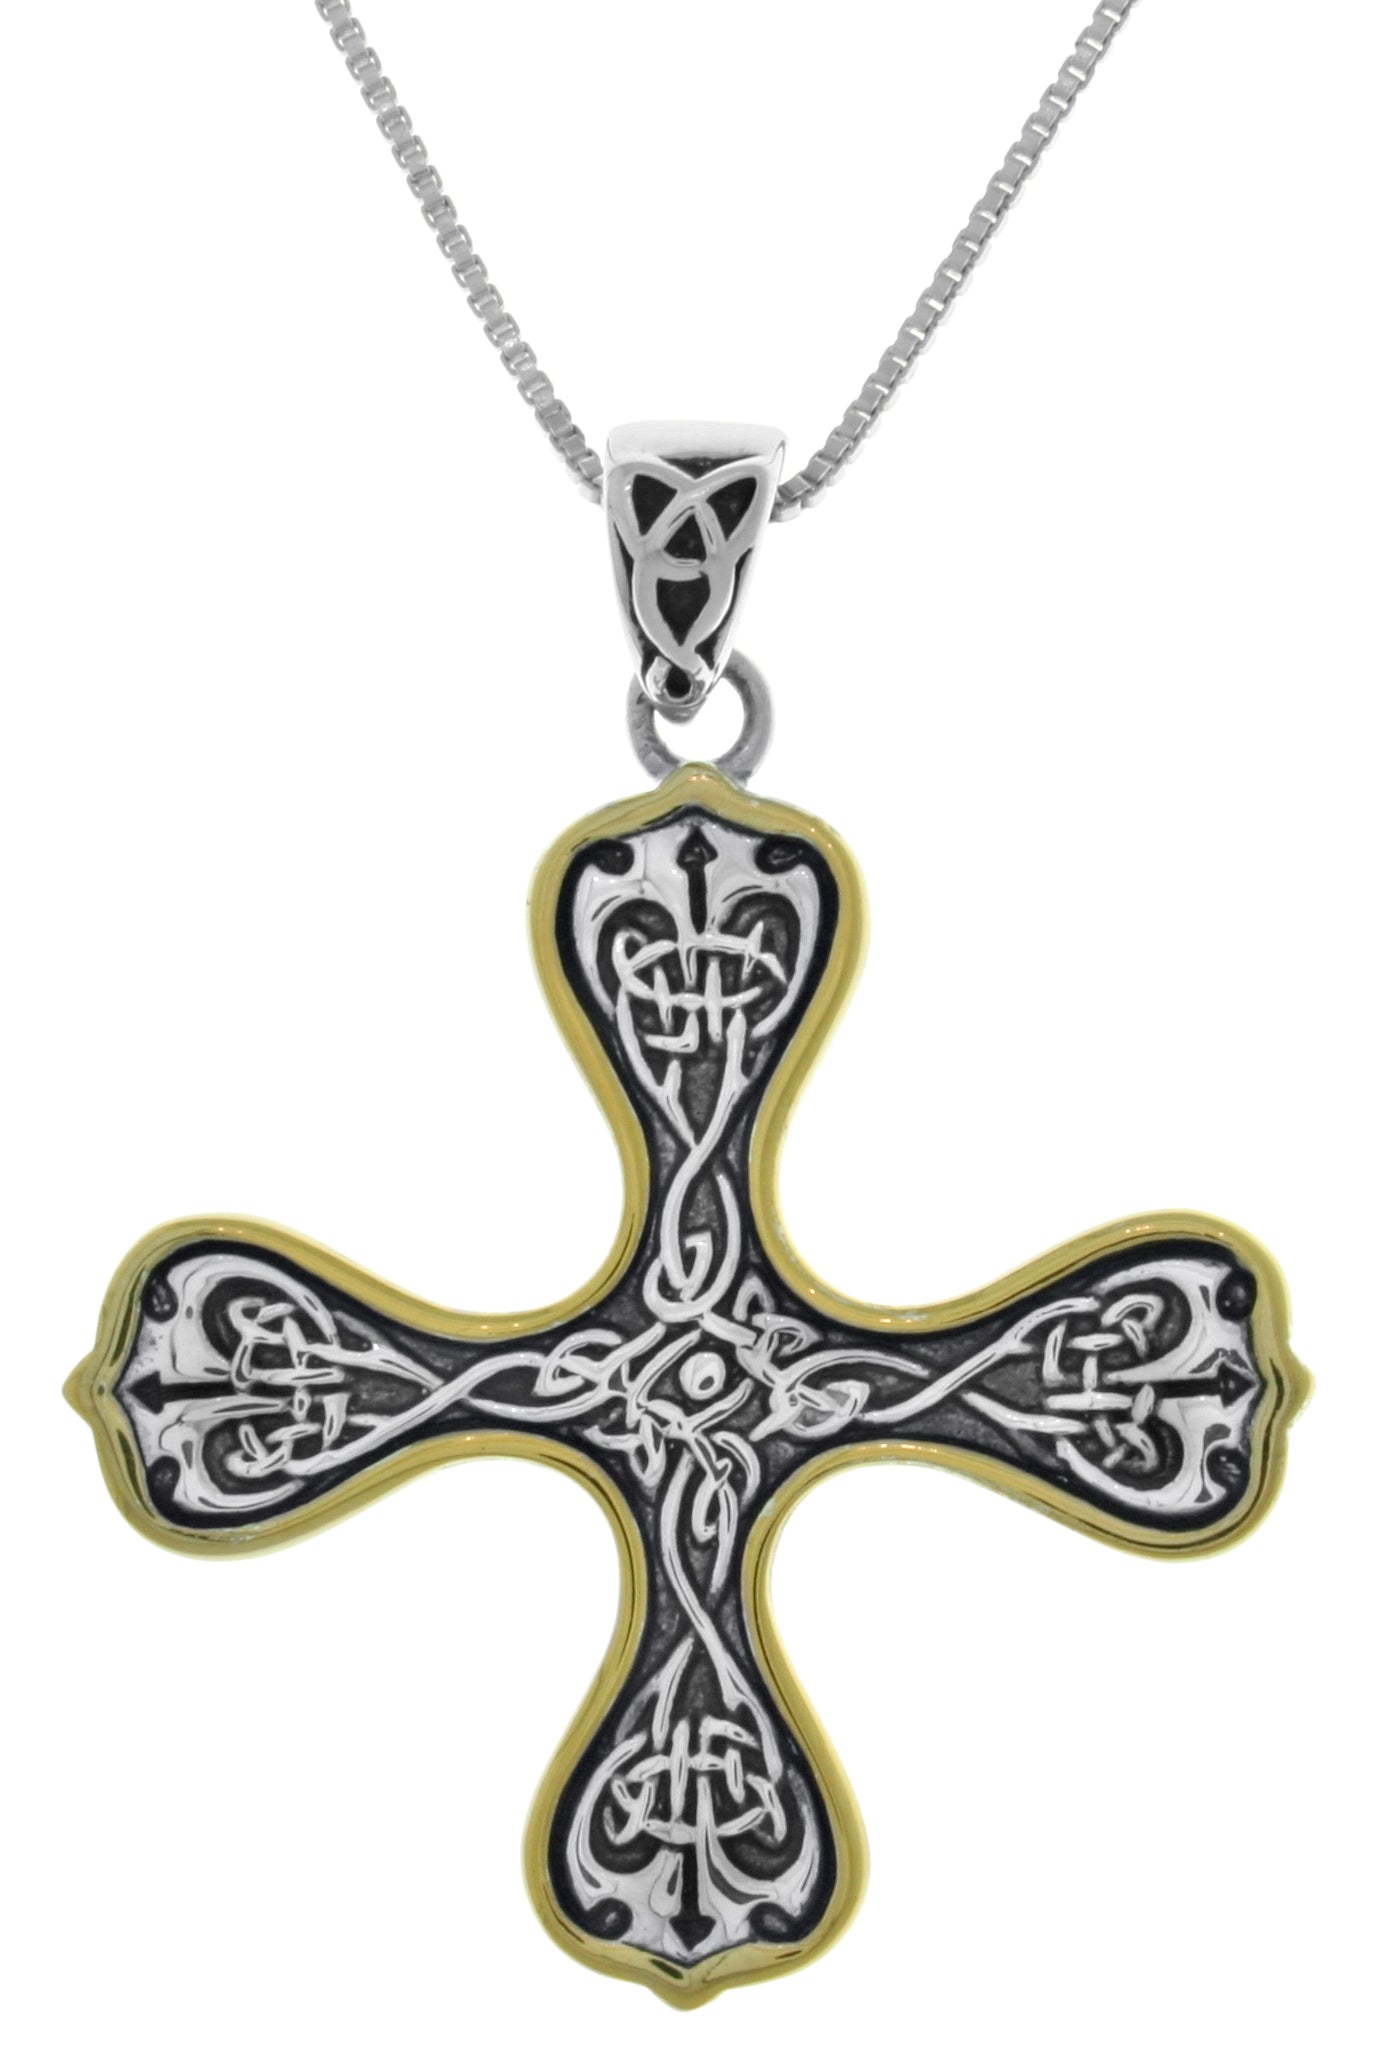 Jewelry Trends Sterling Silver Celtic Knotwork Cross Pendant with 14k Gold-Plating on 18 Inch Box Chain Necklace